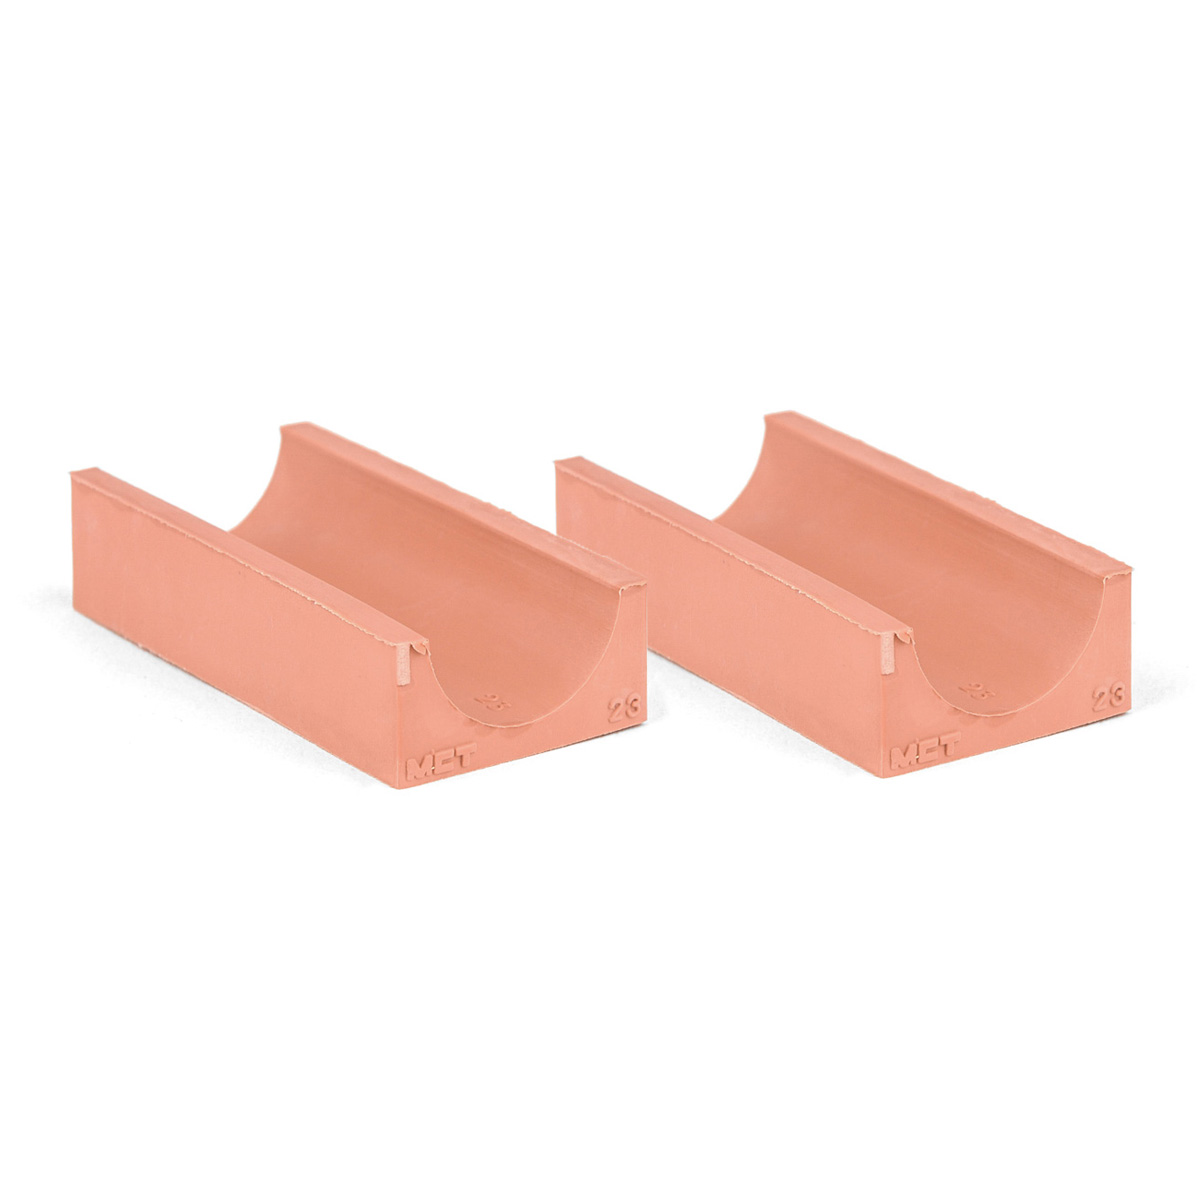 30-23*2 Set of 2 half insert block lycron, 30-23 for cable/pipe diam. 22.5-23.5mm